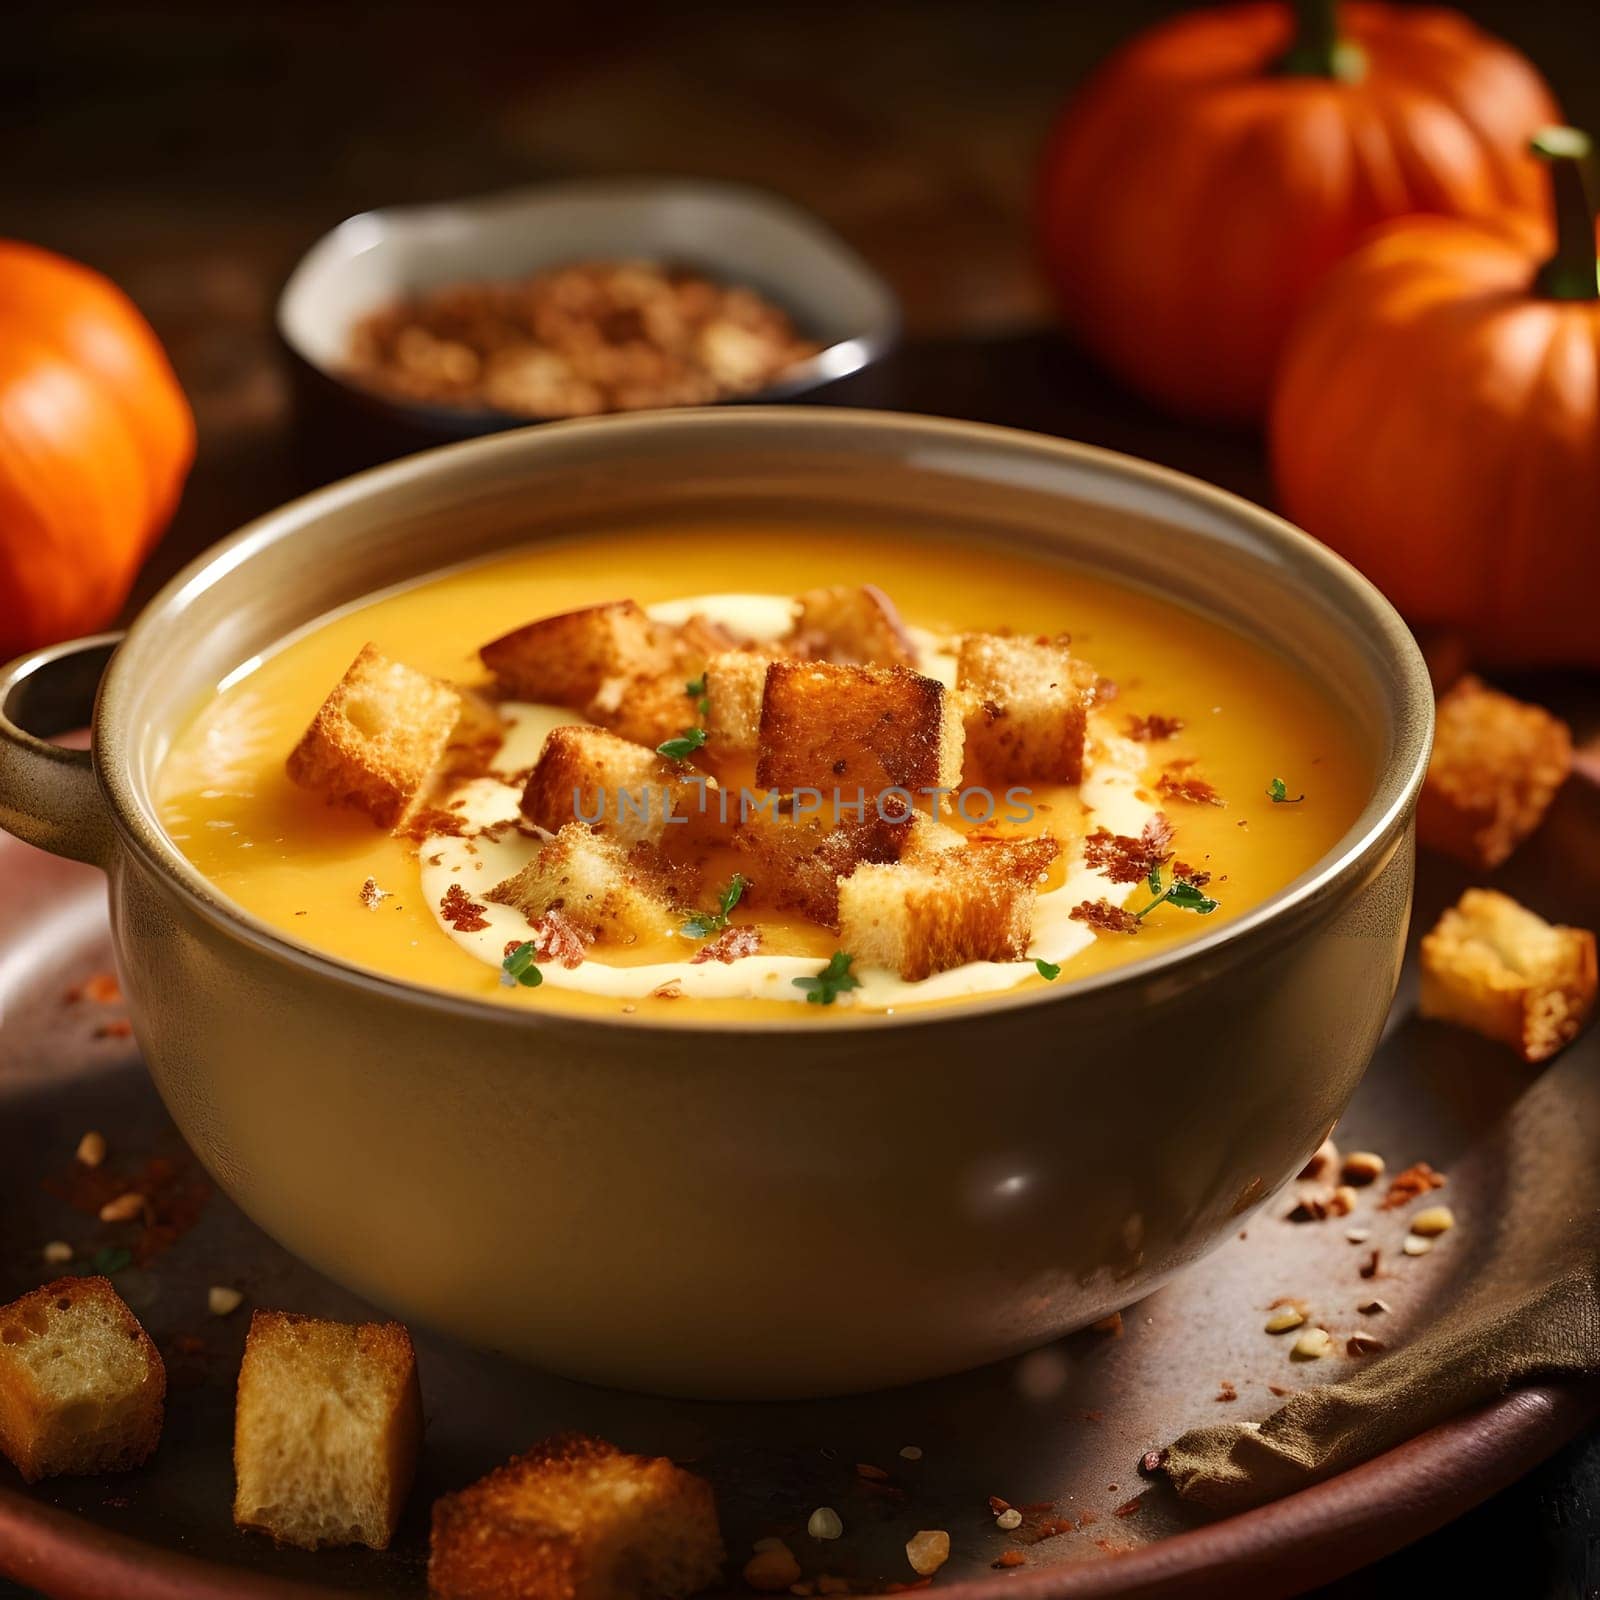 Bowl with pumpkin soup and bagels, smudged background. Pumpkin as a dish of thanksgiving for the harvest. An atmosphere of joy and celebration.